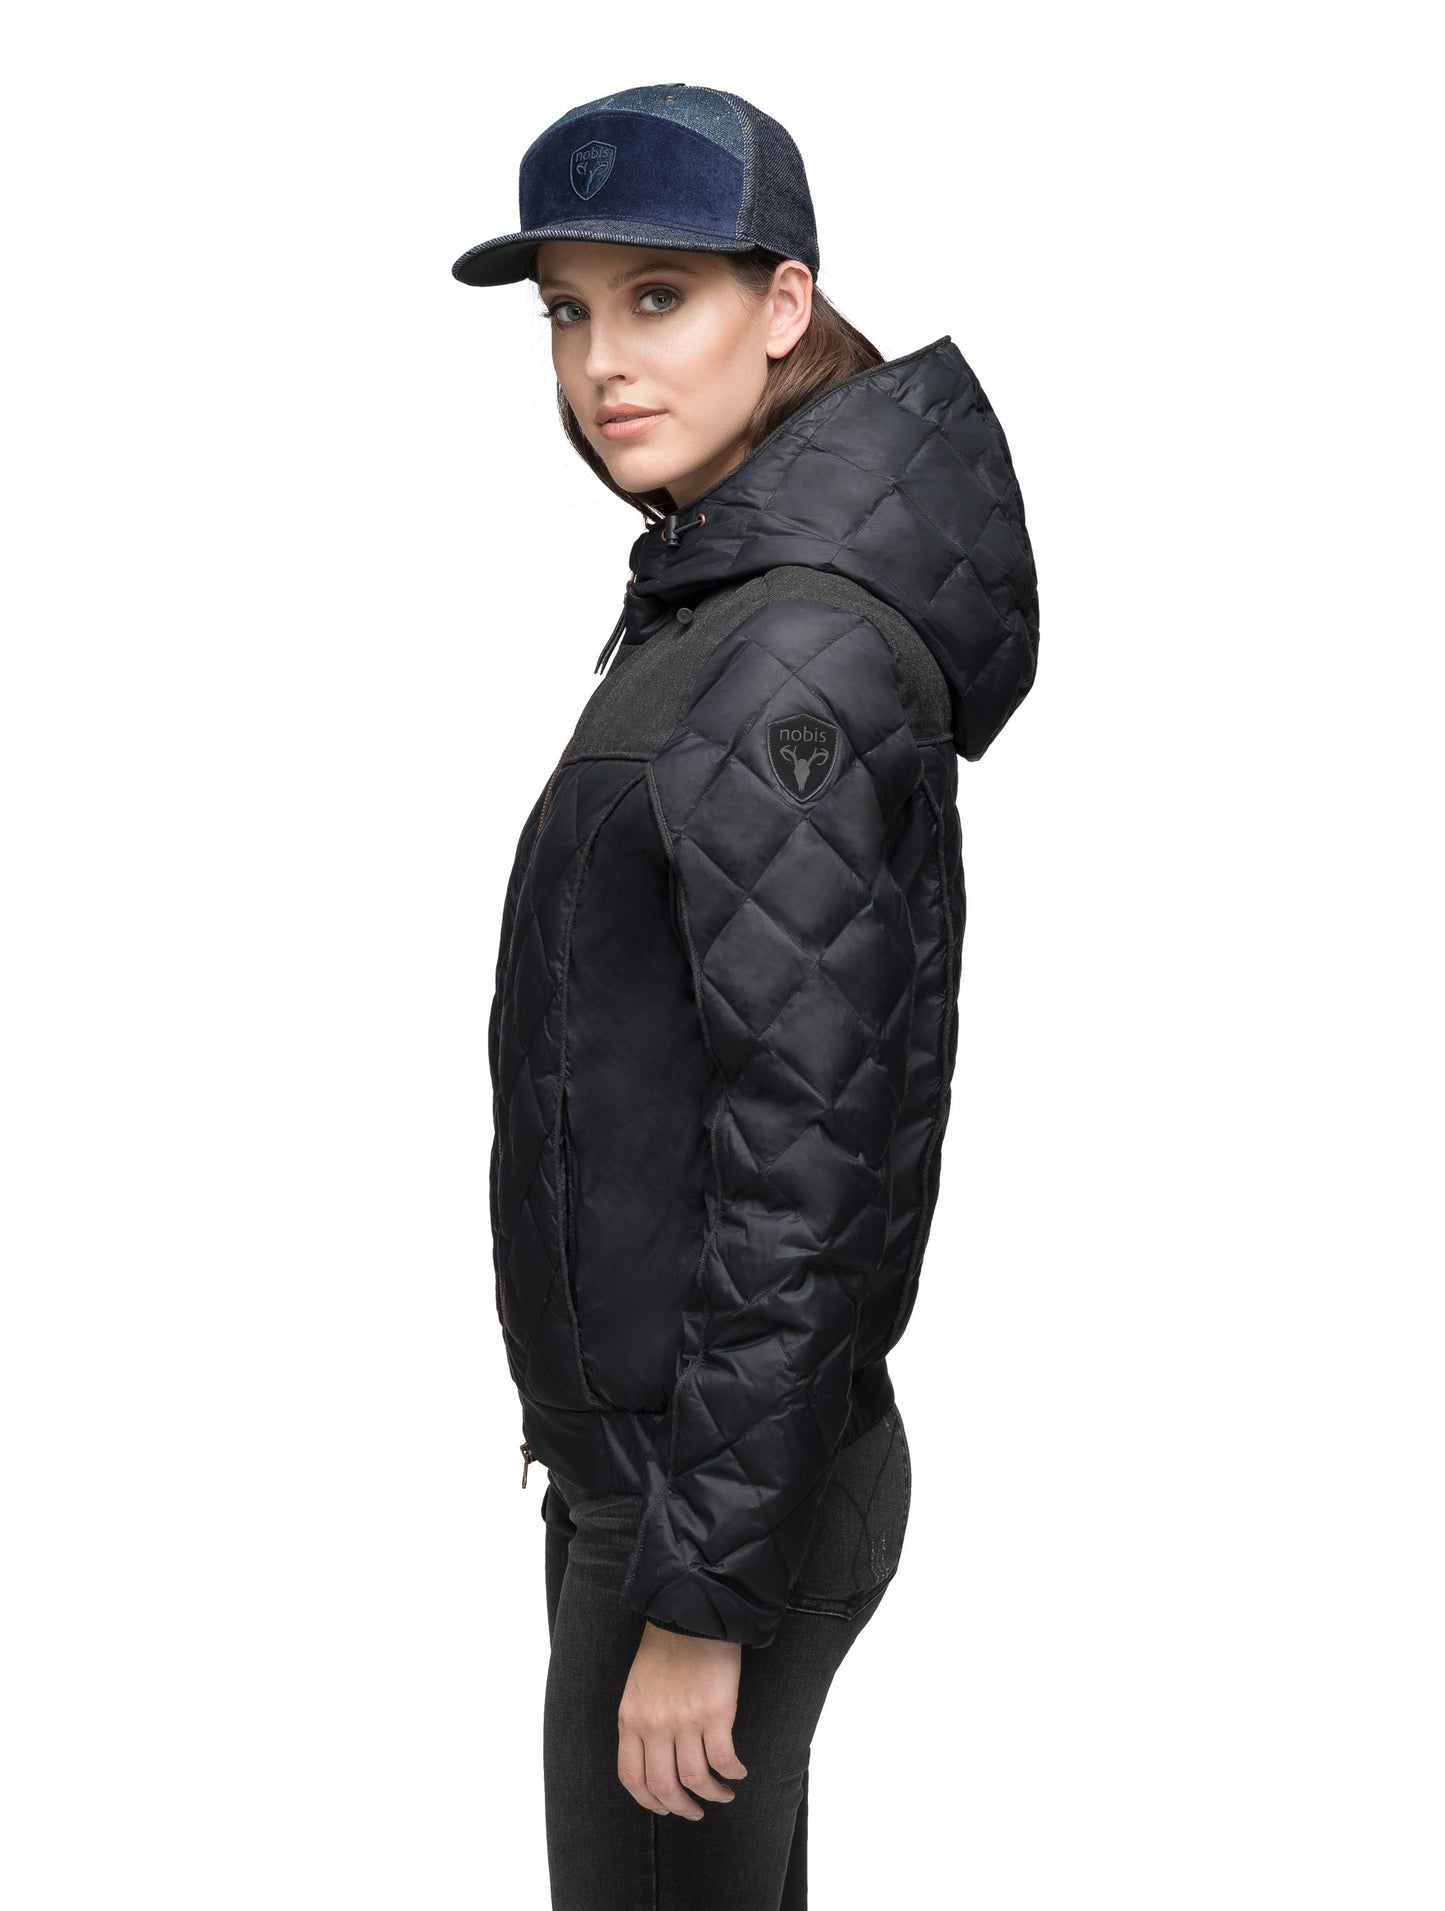 Lightweight women's jacket with hood and quilted pattern featuring a contrasting upper fabric in Black